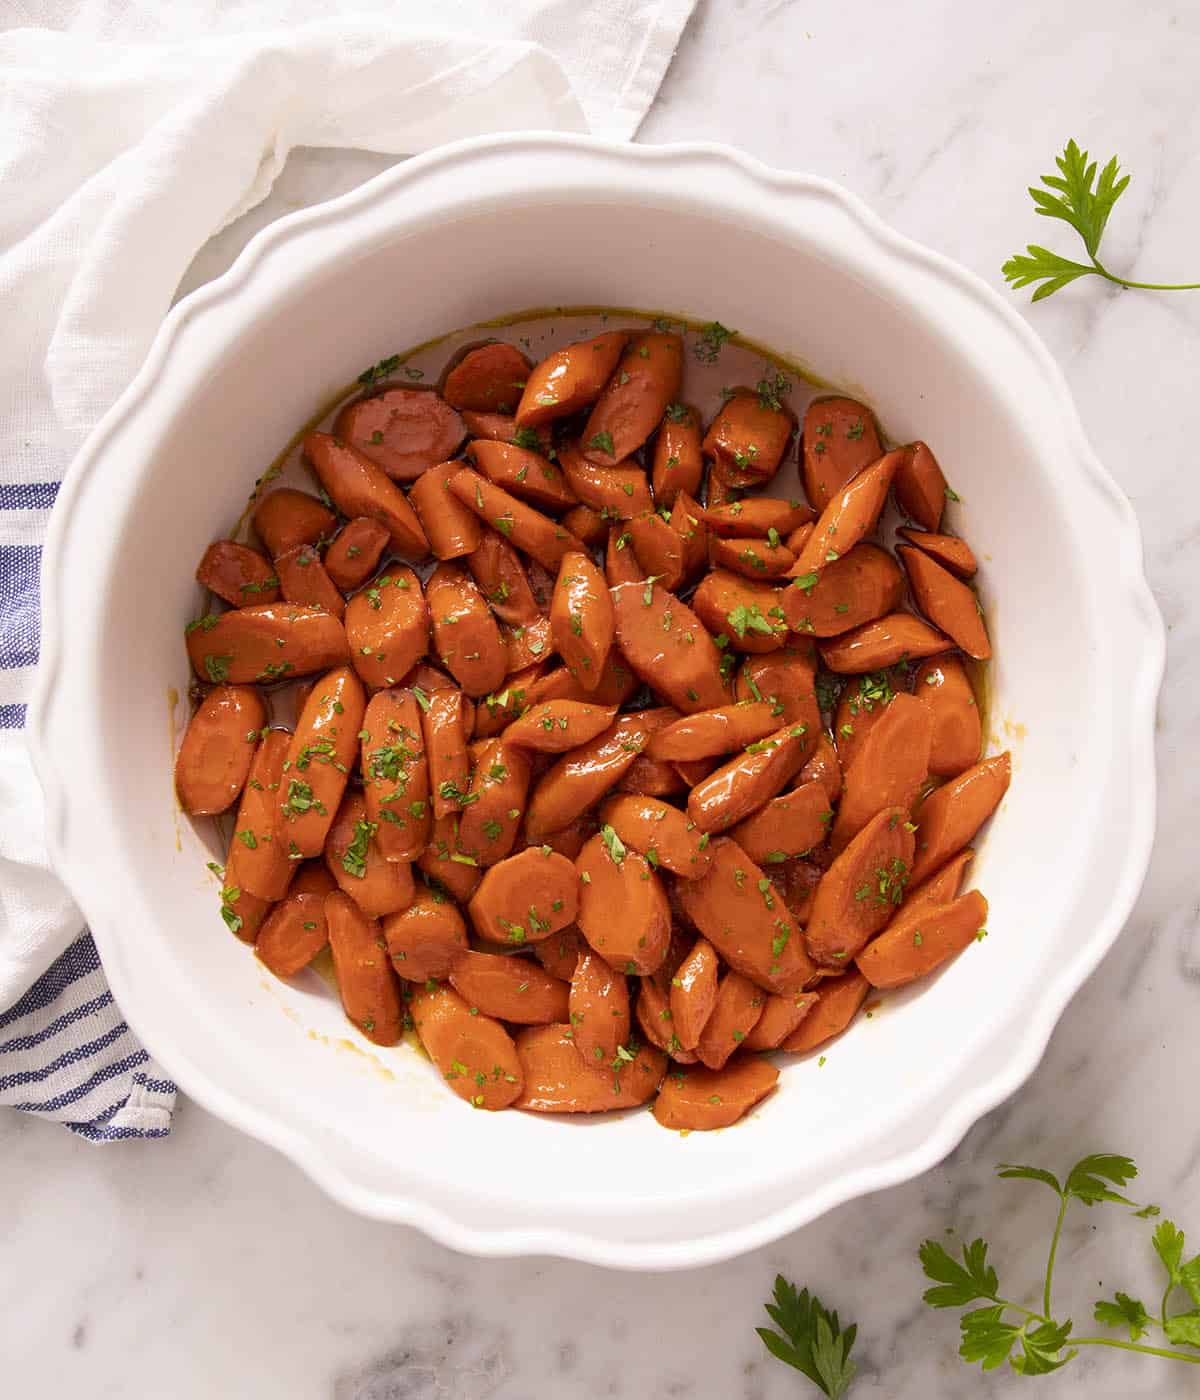 Glazed carrots in a round white dish.